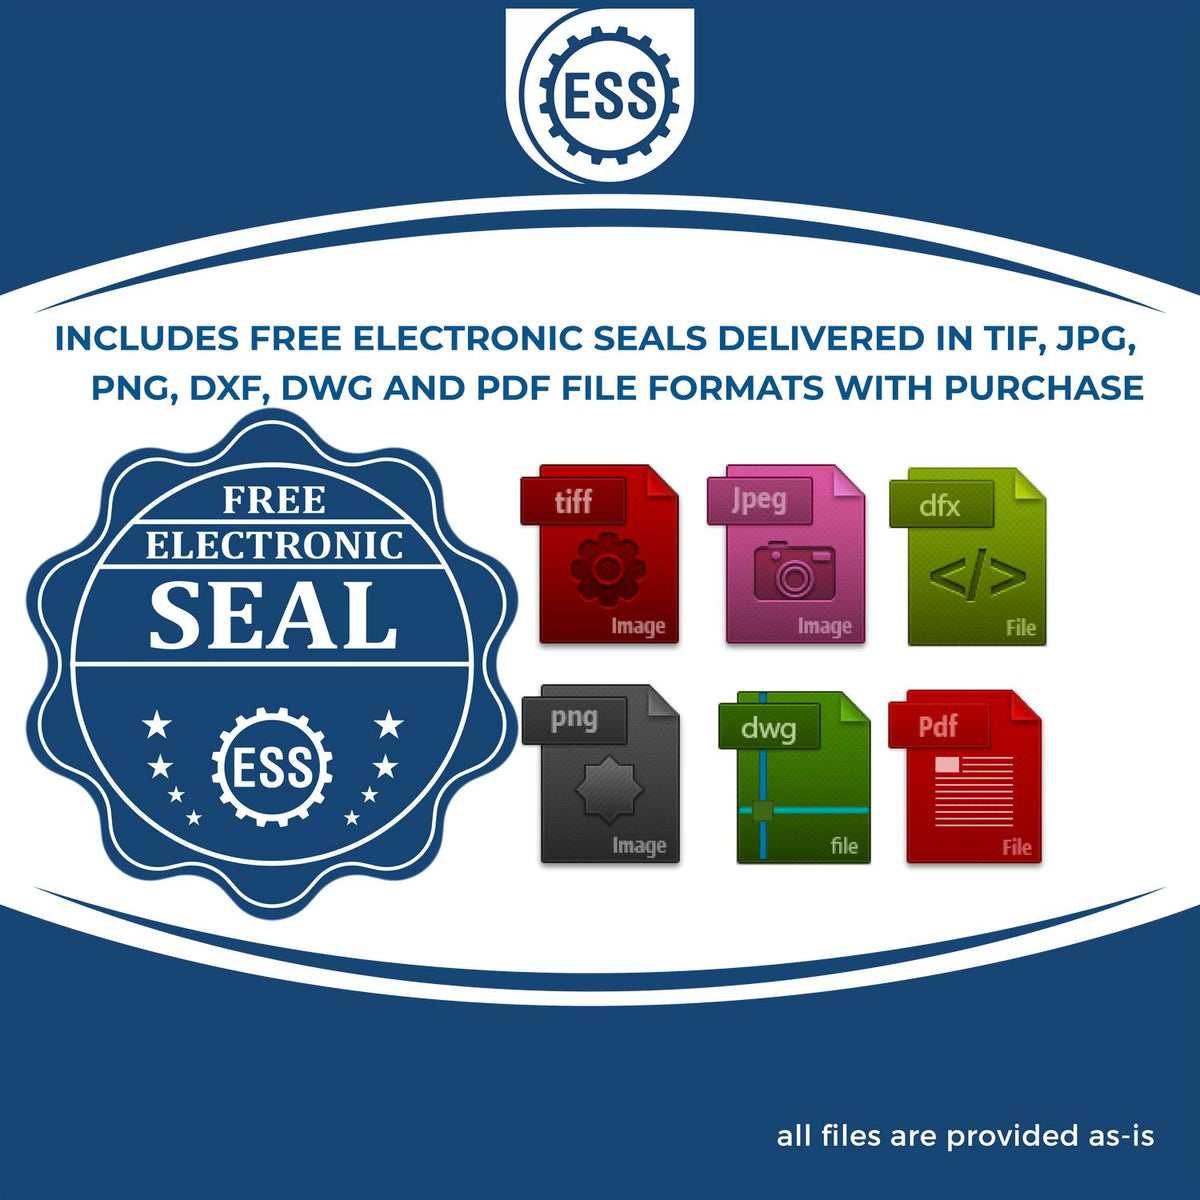 An infographic for the free electronic seal for the New Mexico Geologist Desk Seal illustrating the different file type icons such as DXF, DWG, TIF, JPG and PNG.